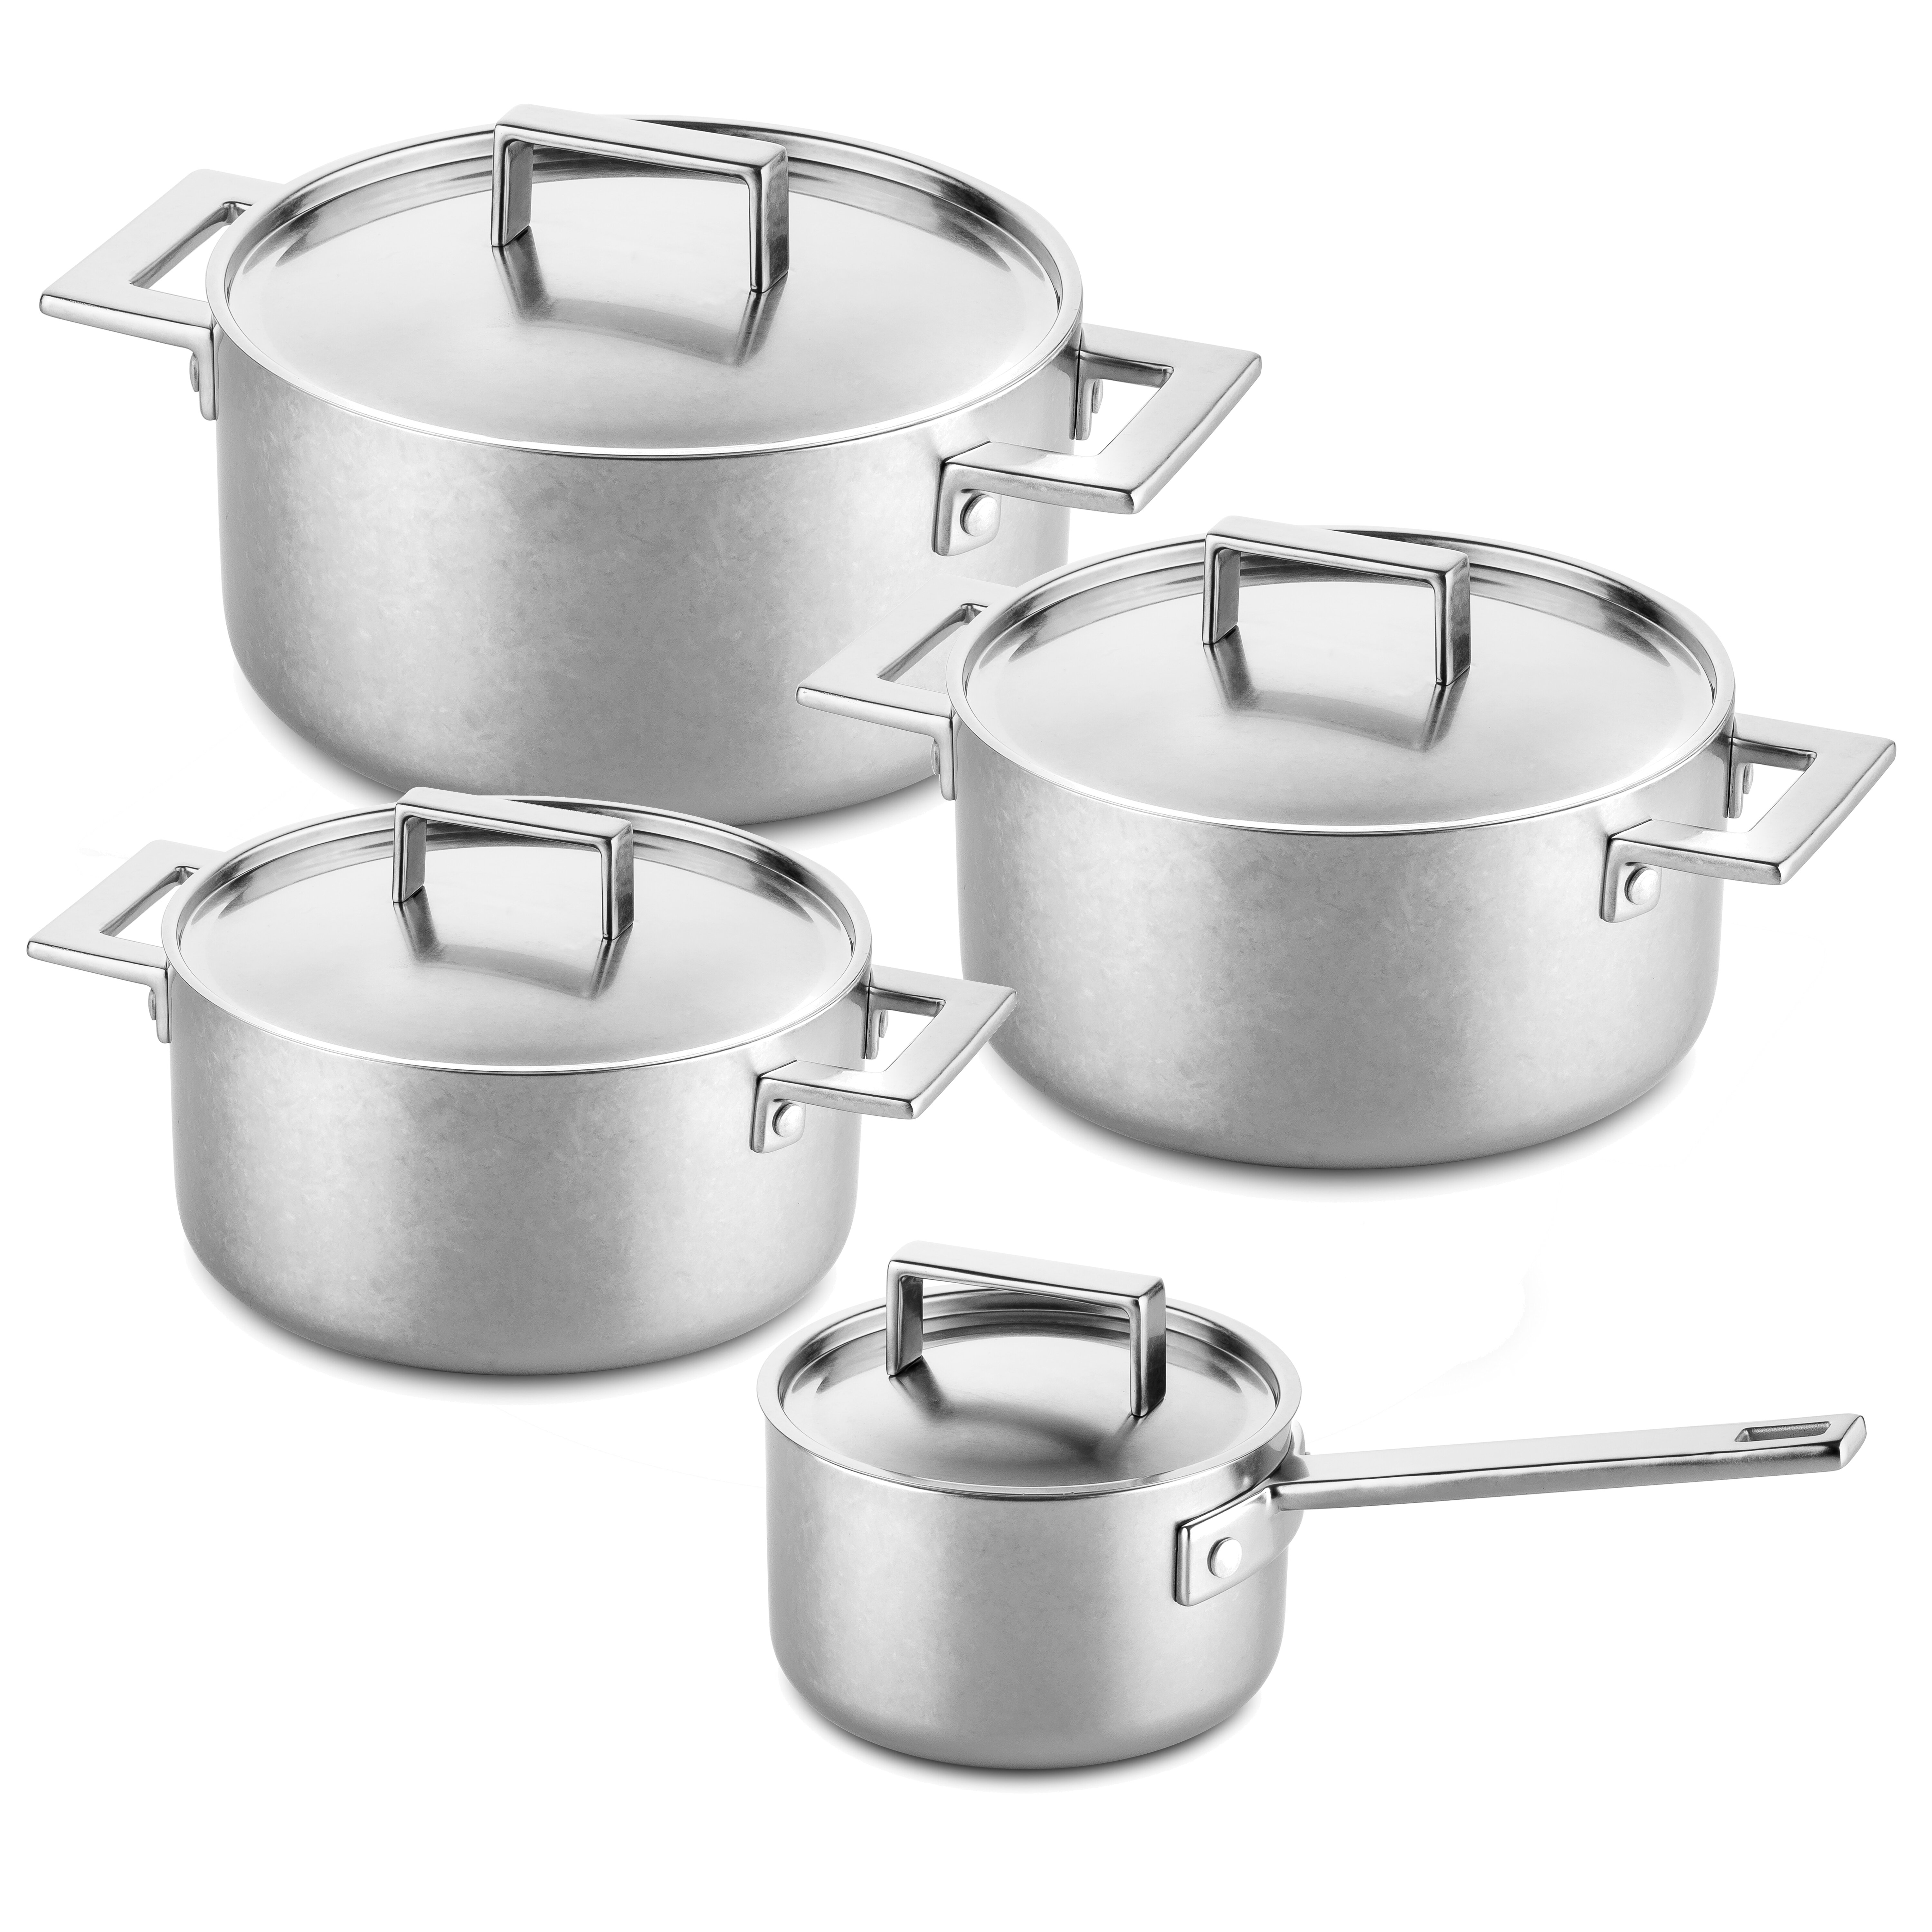 8 Pcs Nonstick Cookware Set Pots and Pans Set with Lids Stainless Steel Handles 